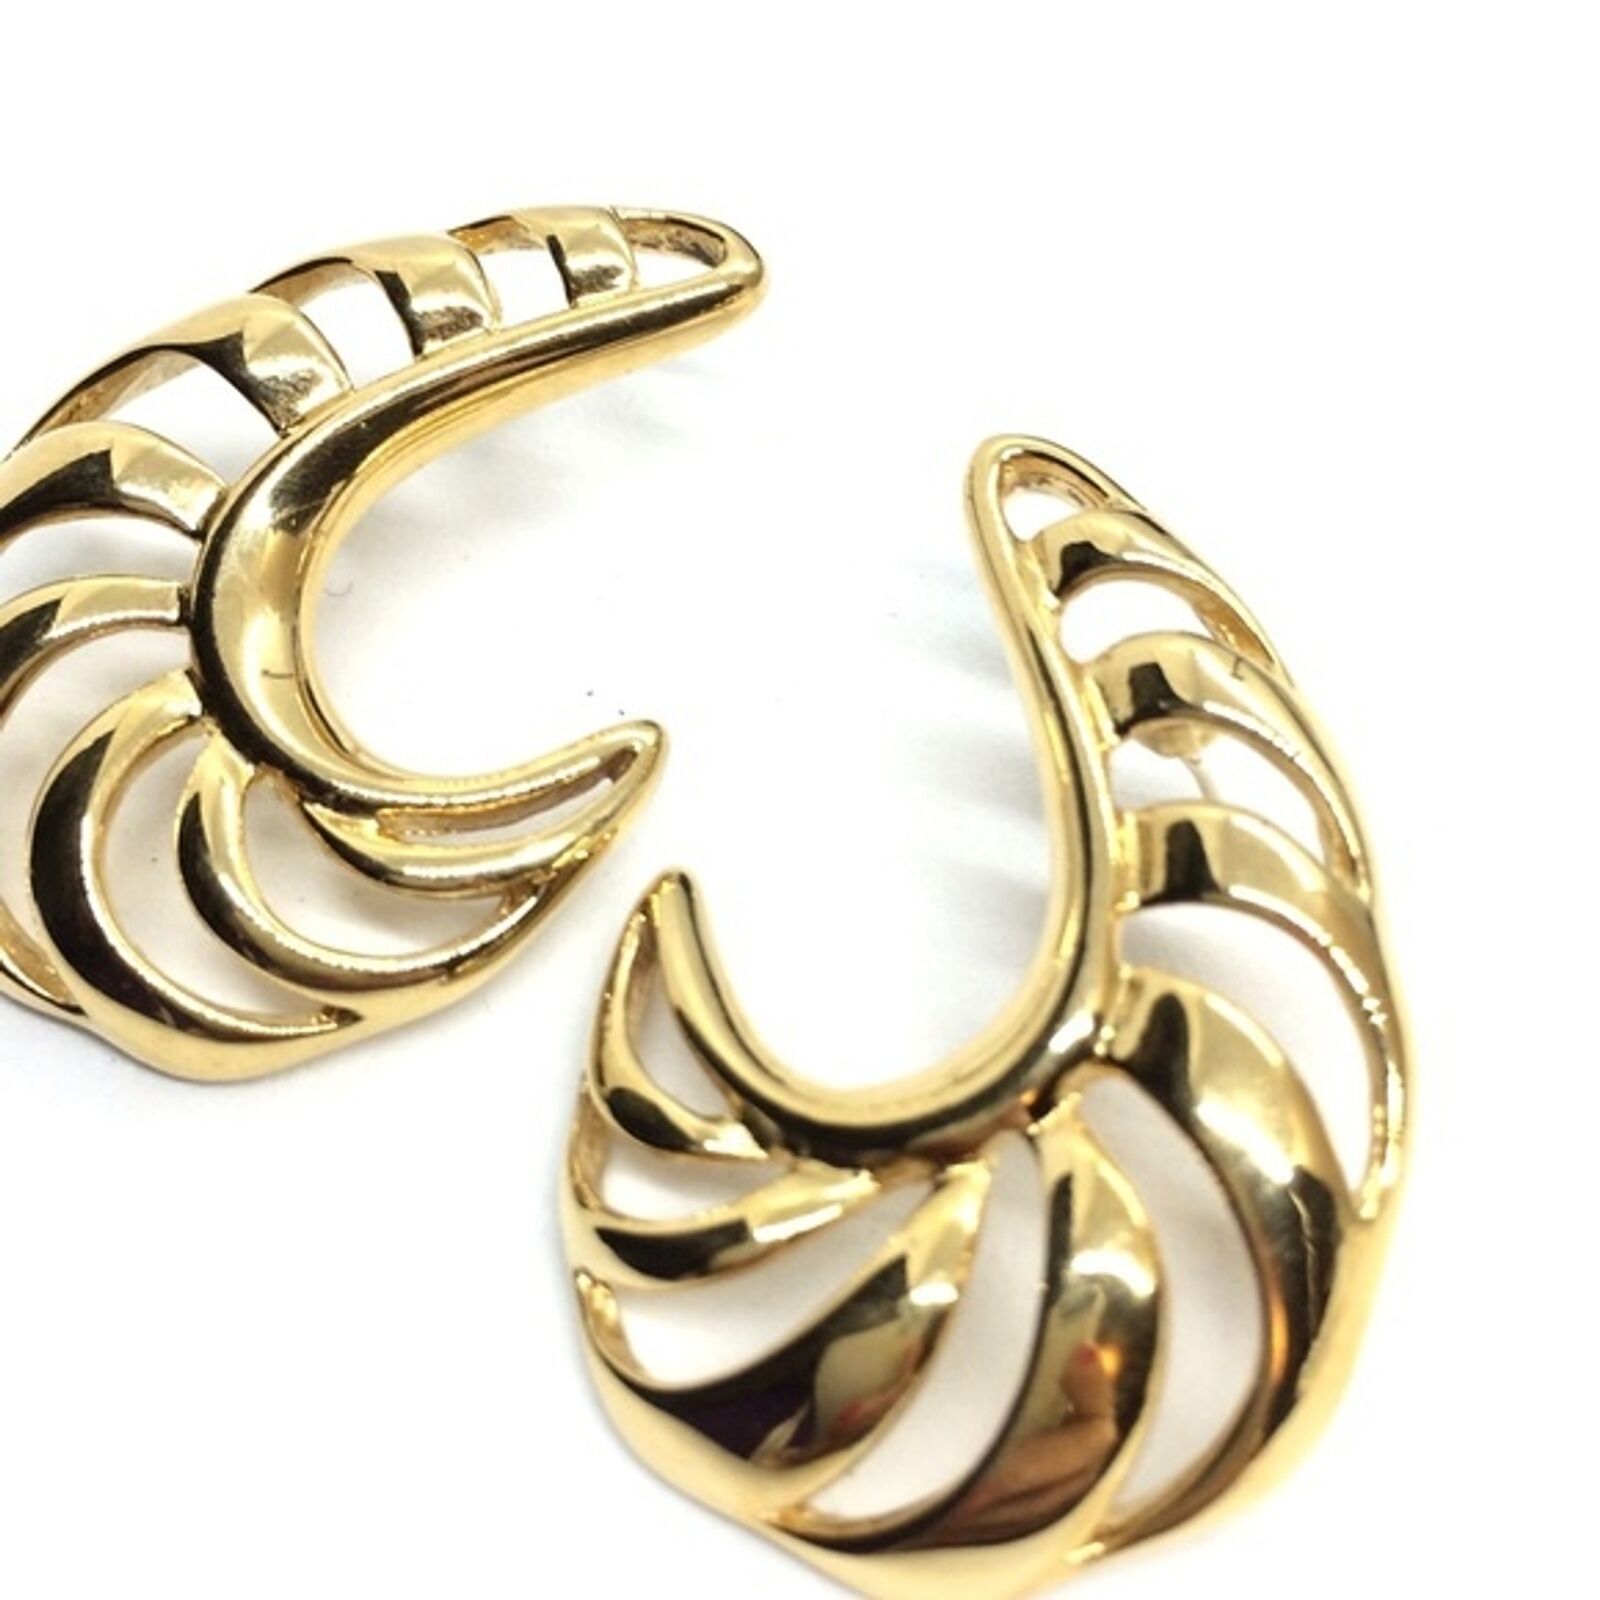 VINTAGE 80S NAPIER EARRINGS CRESCENT HOOP GOLD TO… - image 7